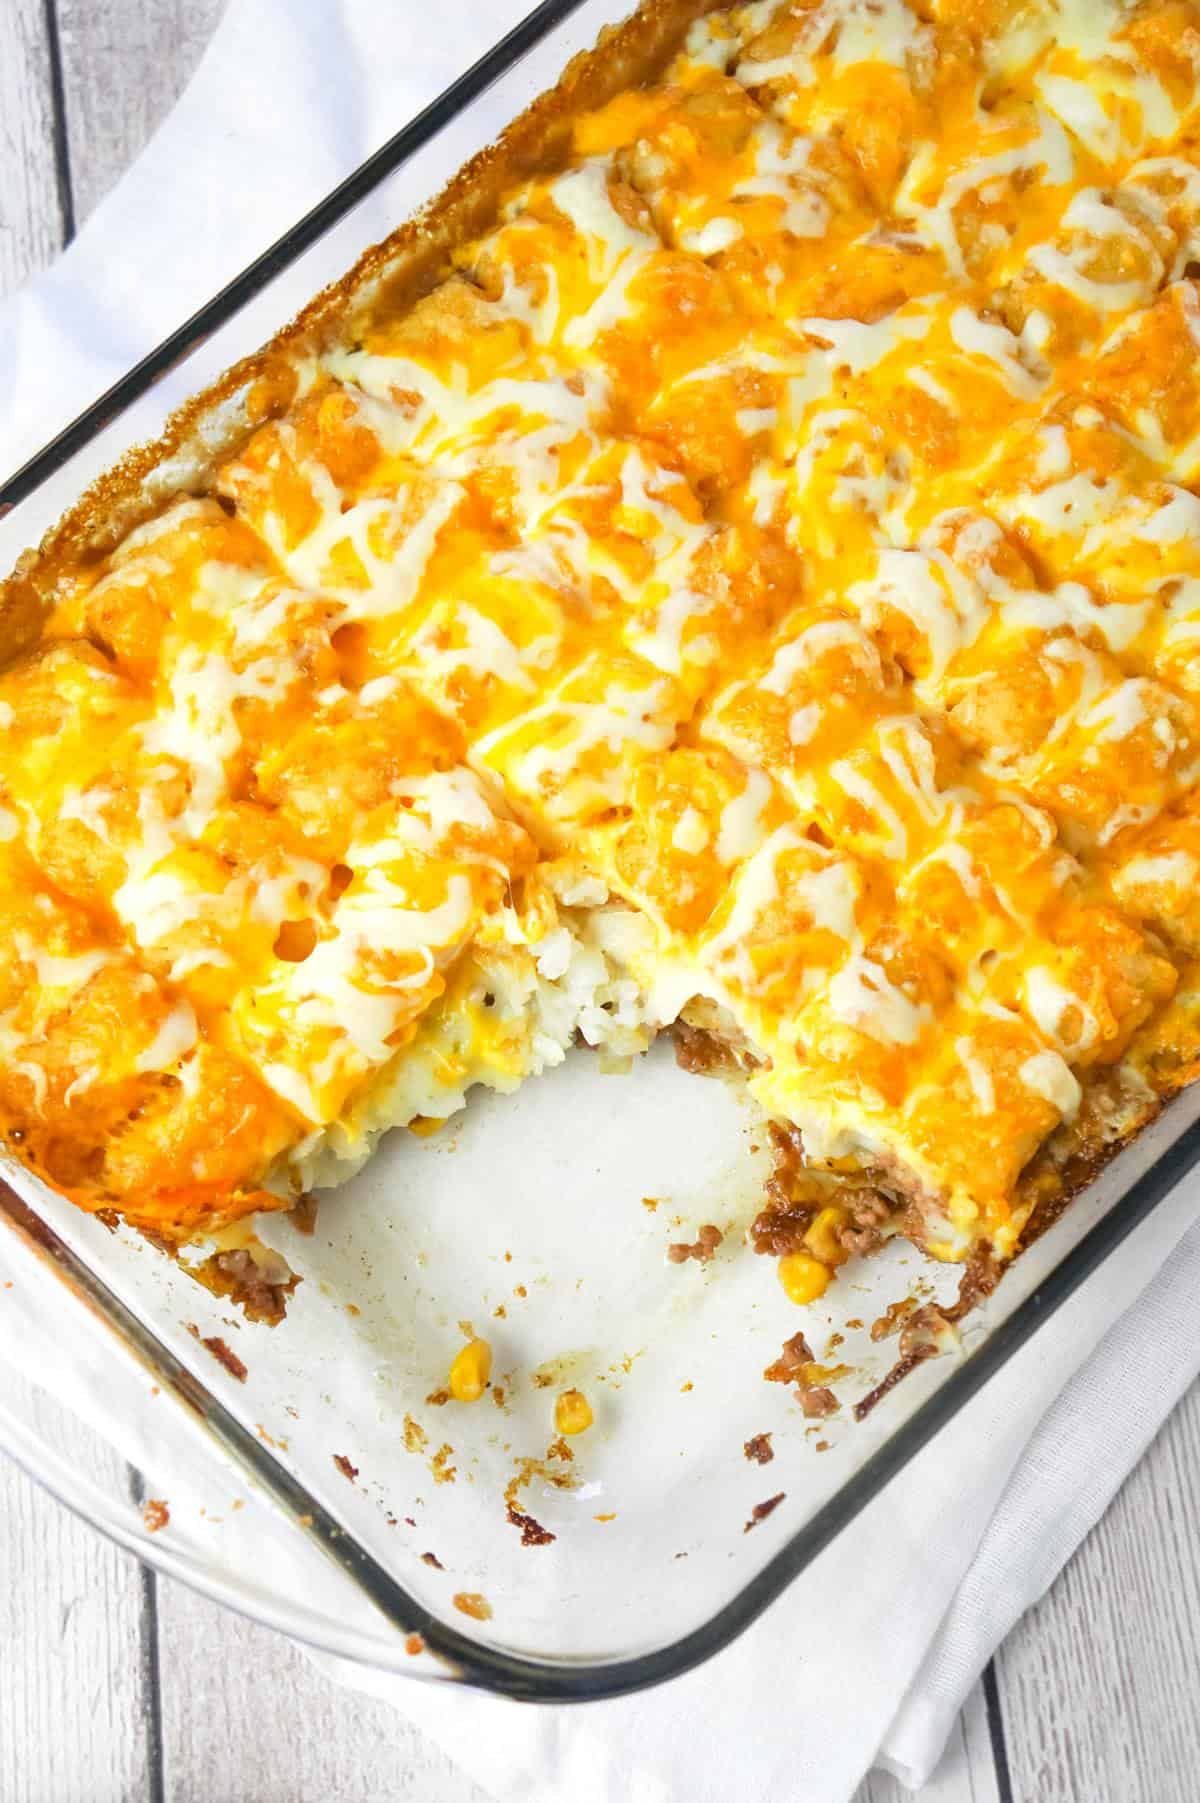 Shepherd's Pie Tater Tot Casserole is a hearty casserole with ground beef, corn and diced onions topped with mashed potatoes, tater tots and shredded cheese.